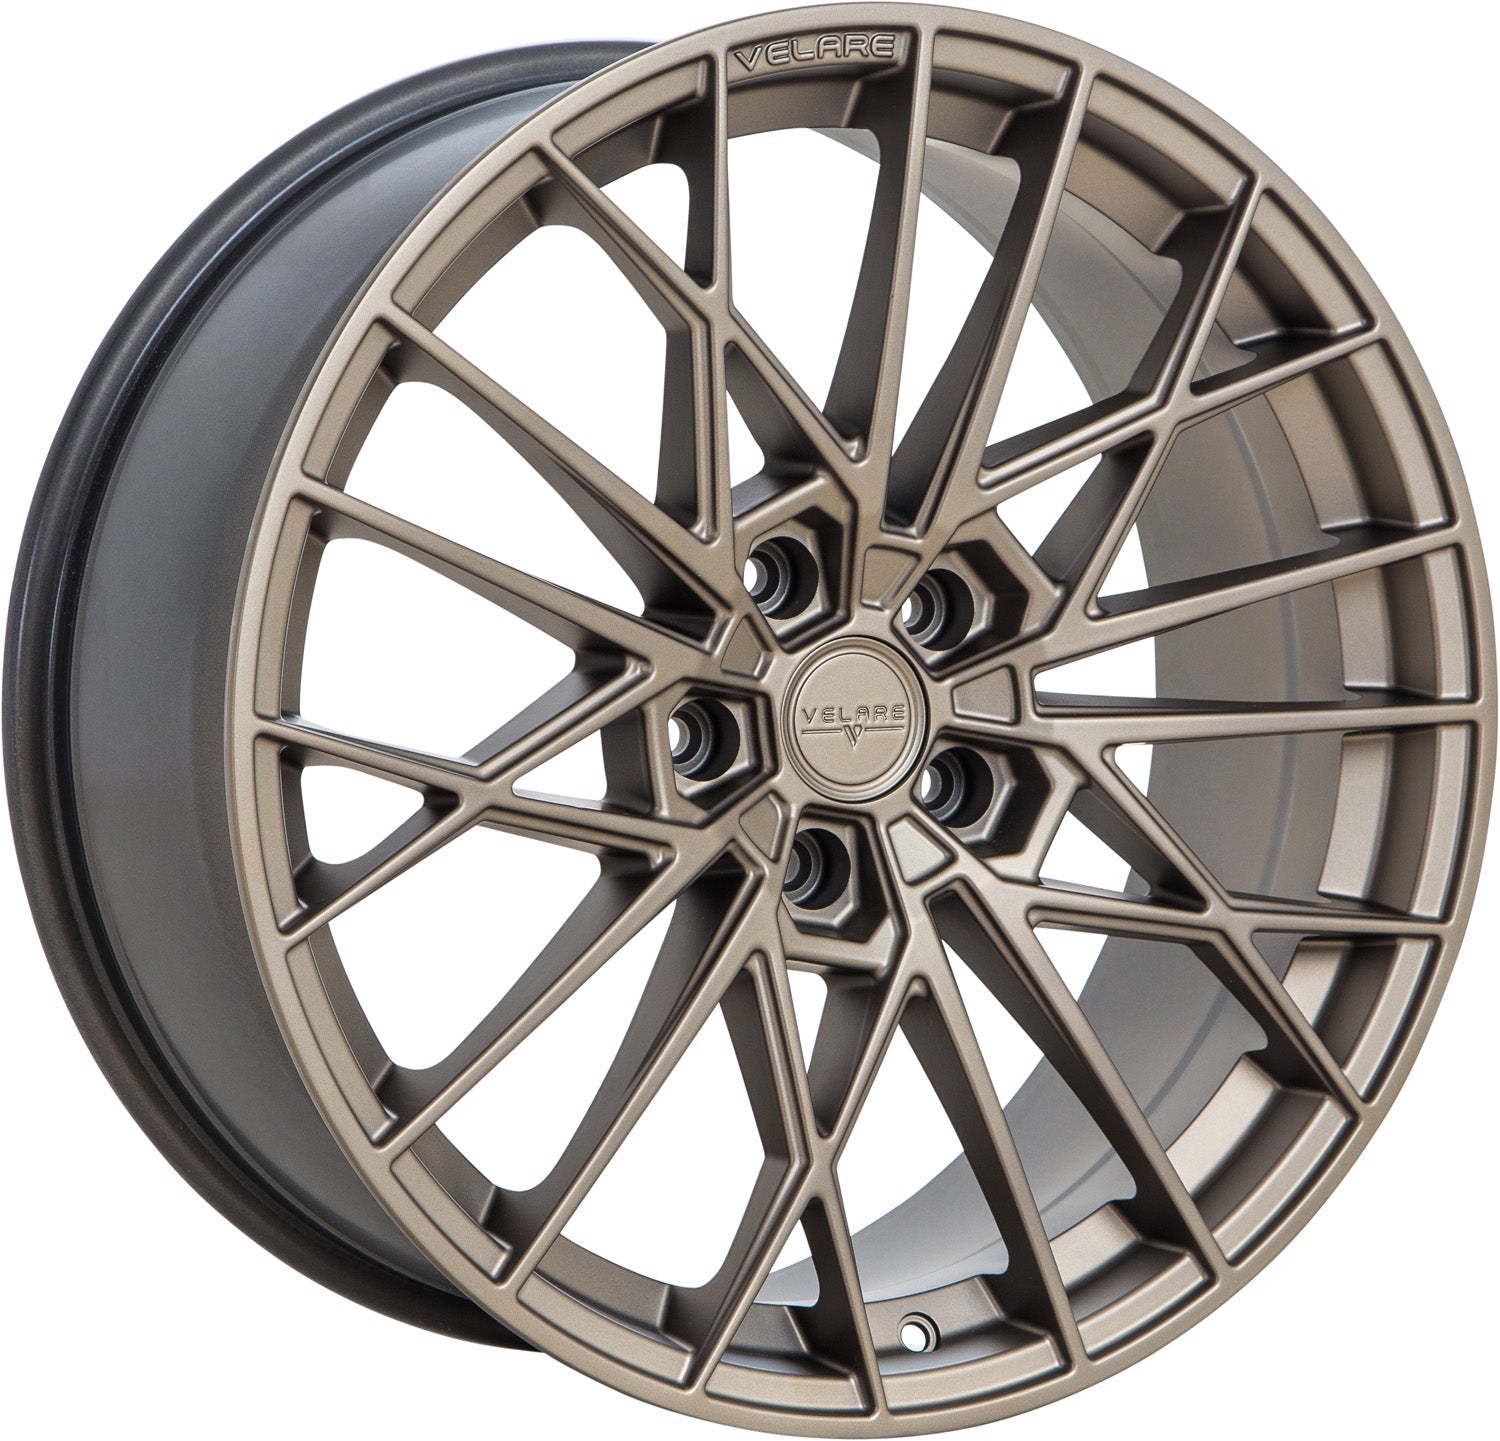 VLR07 Wheel and Tyre Package-Alloy wheels-Velare- DC Leisure